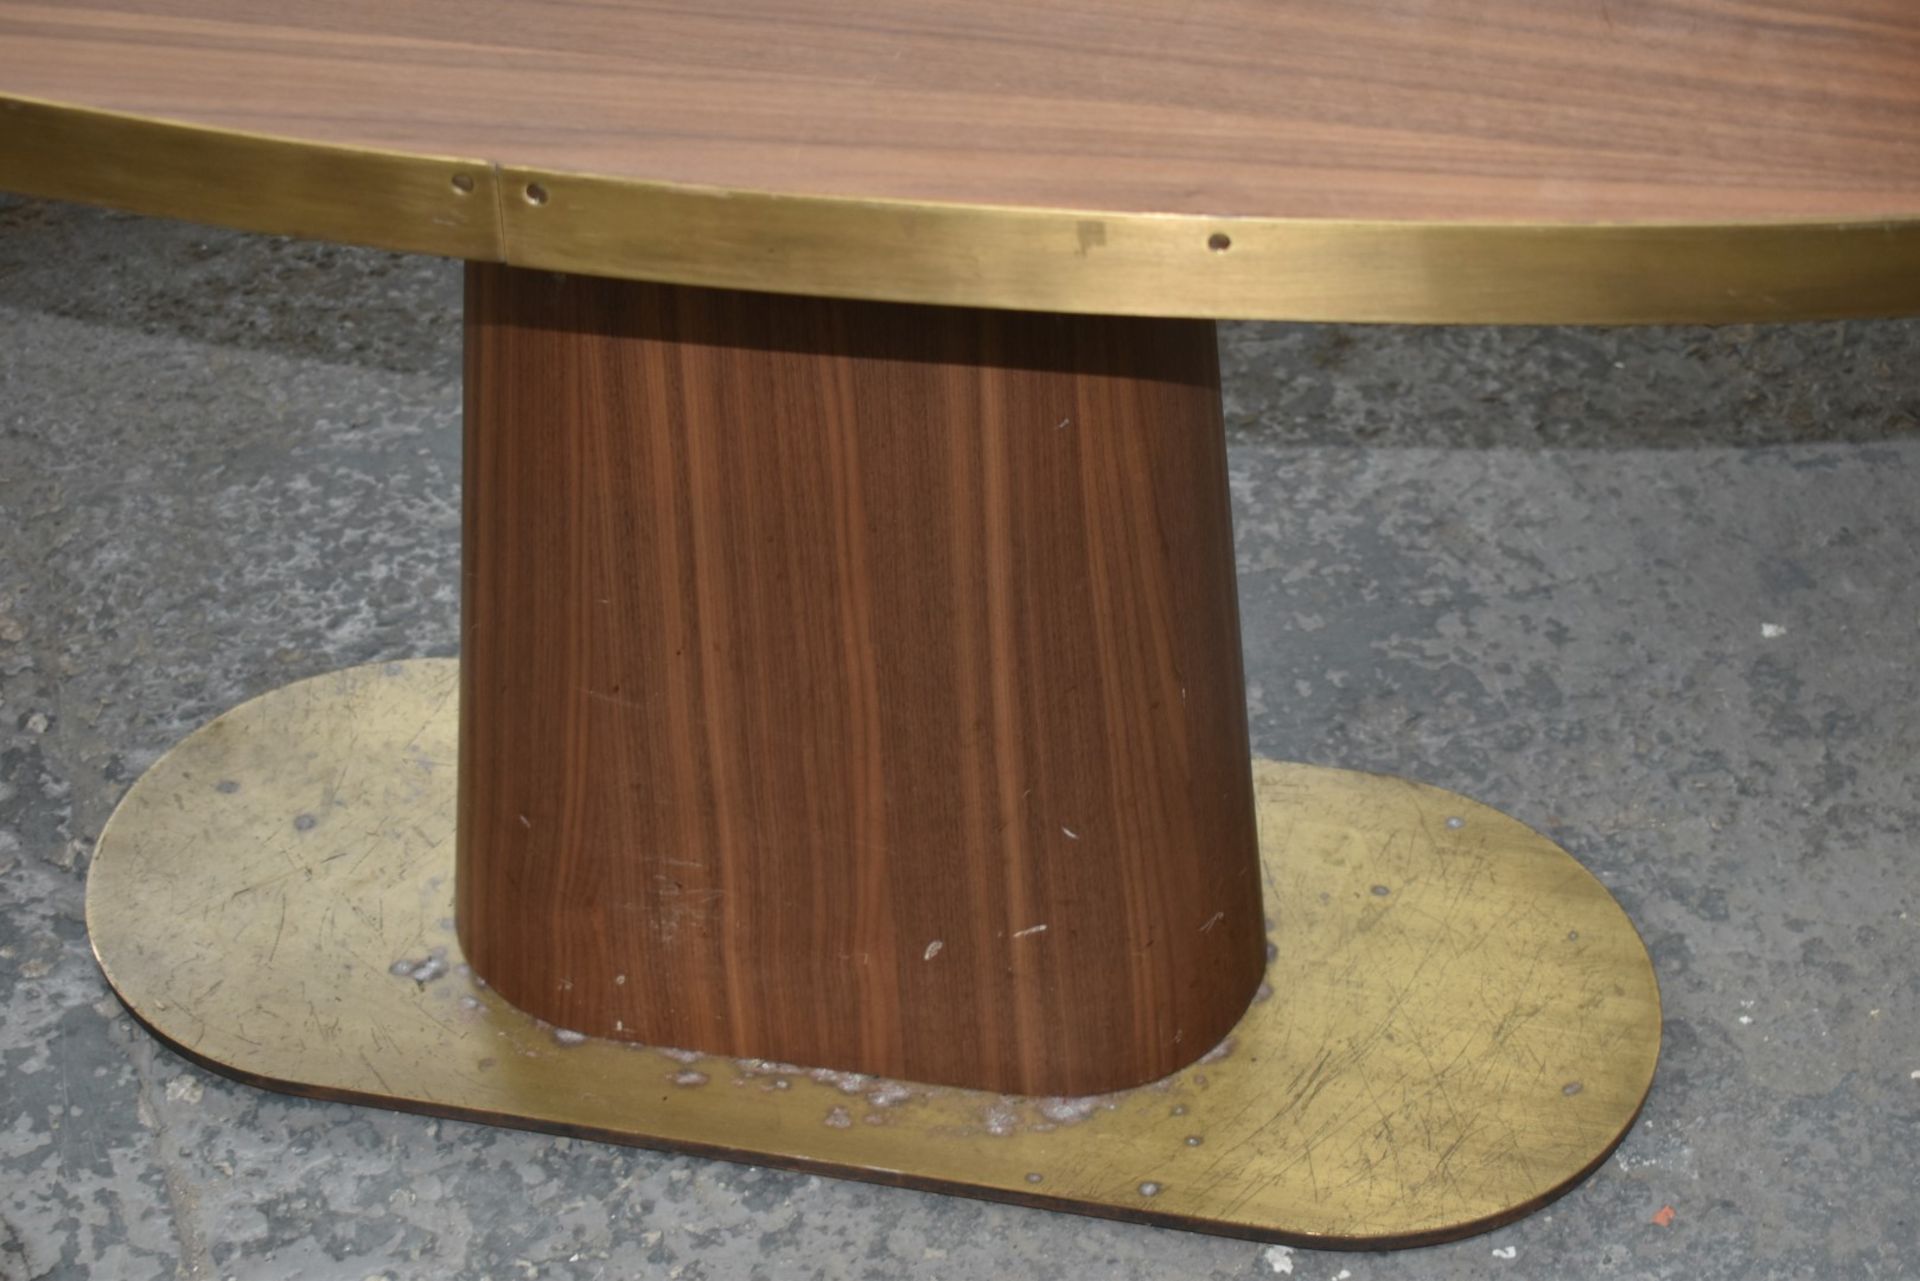 1 x Oval Banqueting Dining Table By AKP Design Athens - Walnut Top With Antique Brass Edging - Image 7 of 10